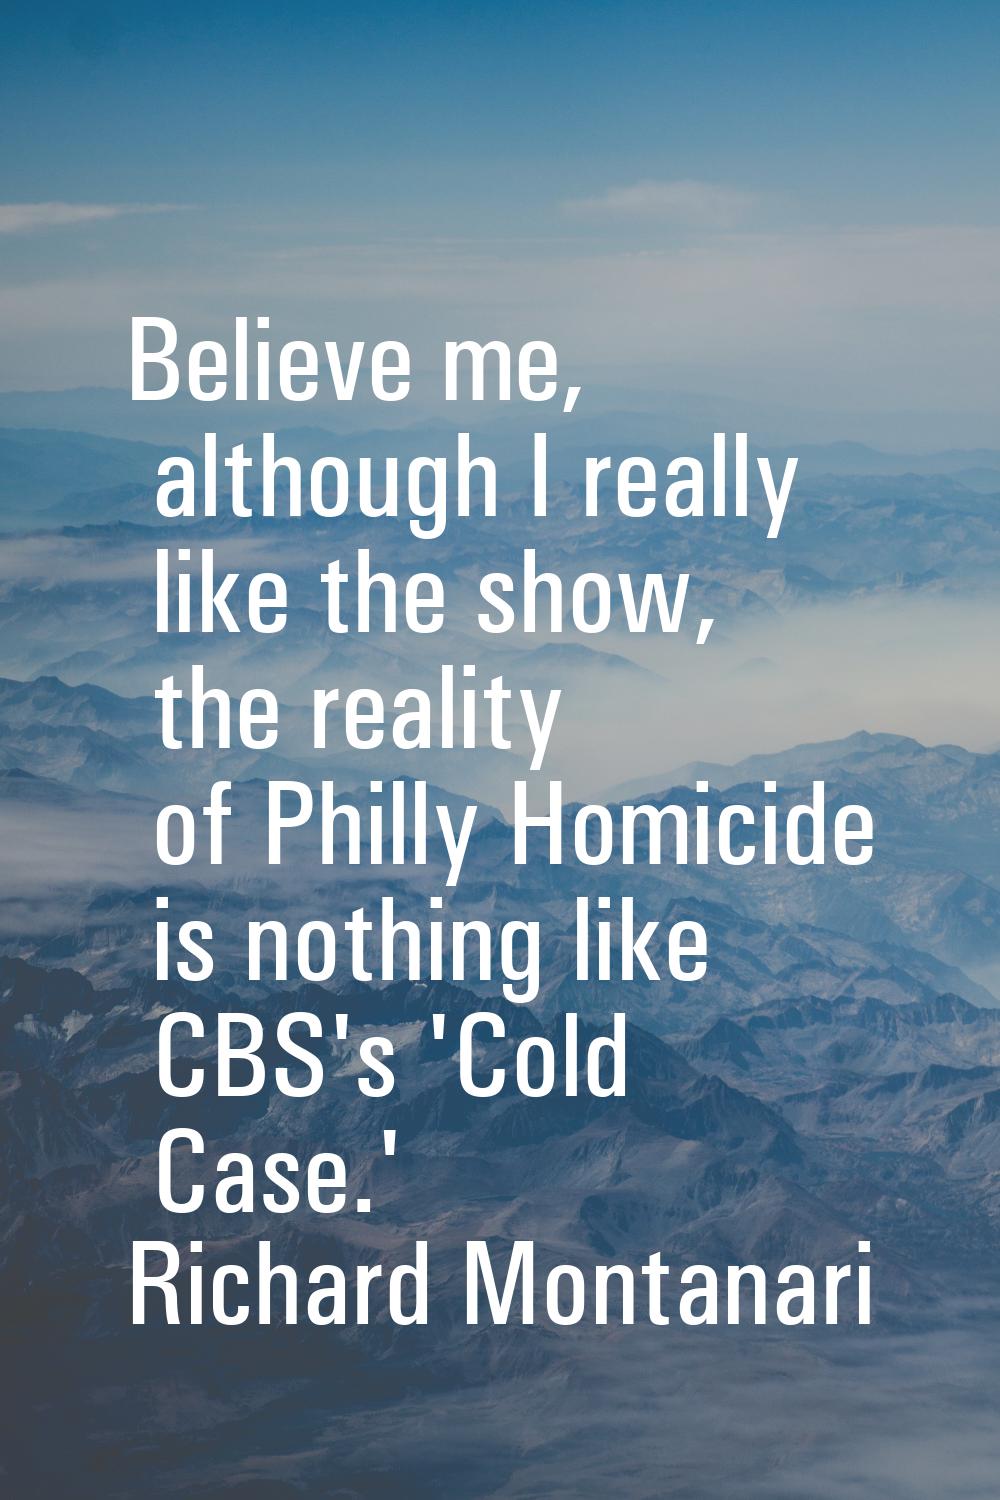 Believe me, although I really like the show, the reality of Philly Homicide is nothing like CBS's '